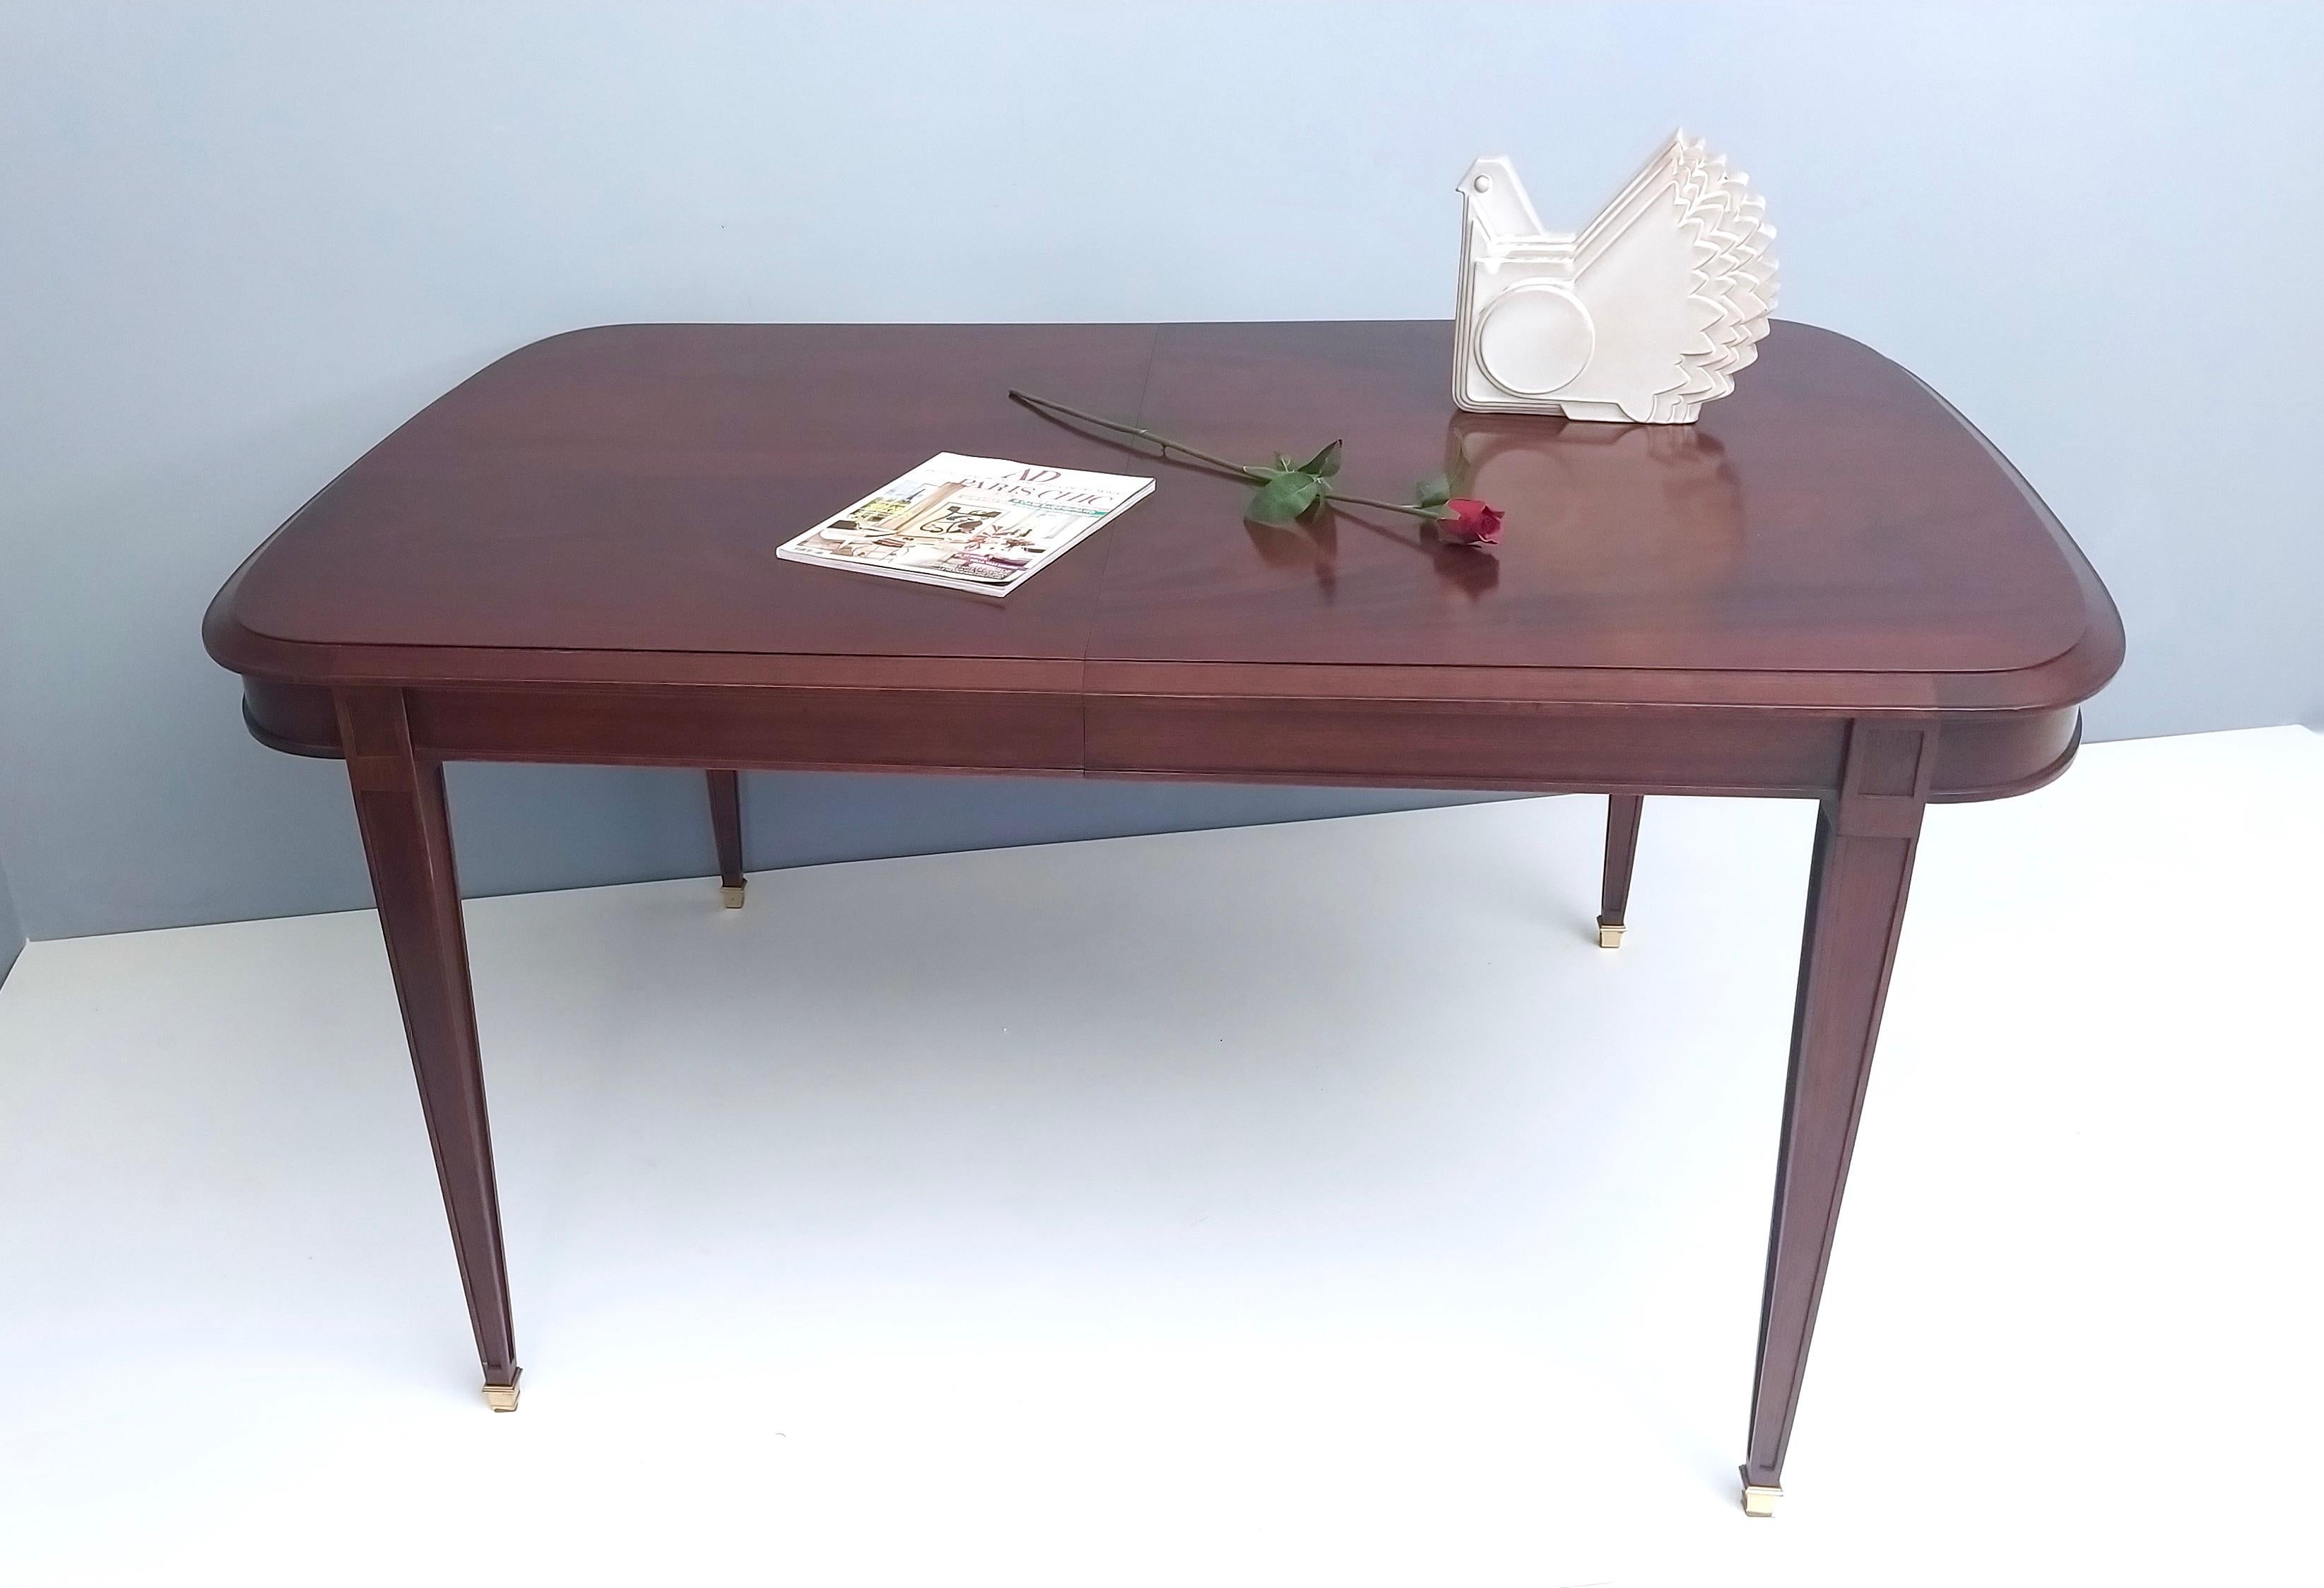 Late 20th Century High-Quality Mahogany Extendible Dining Table Produced by Provasi, Italy, 1980s